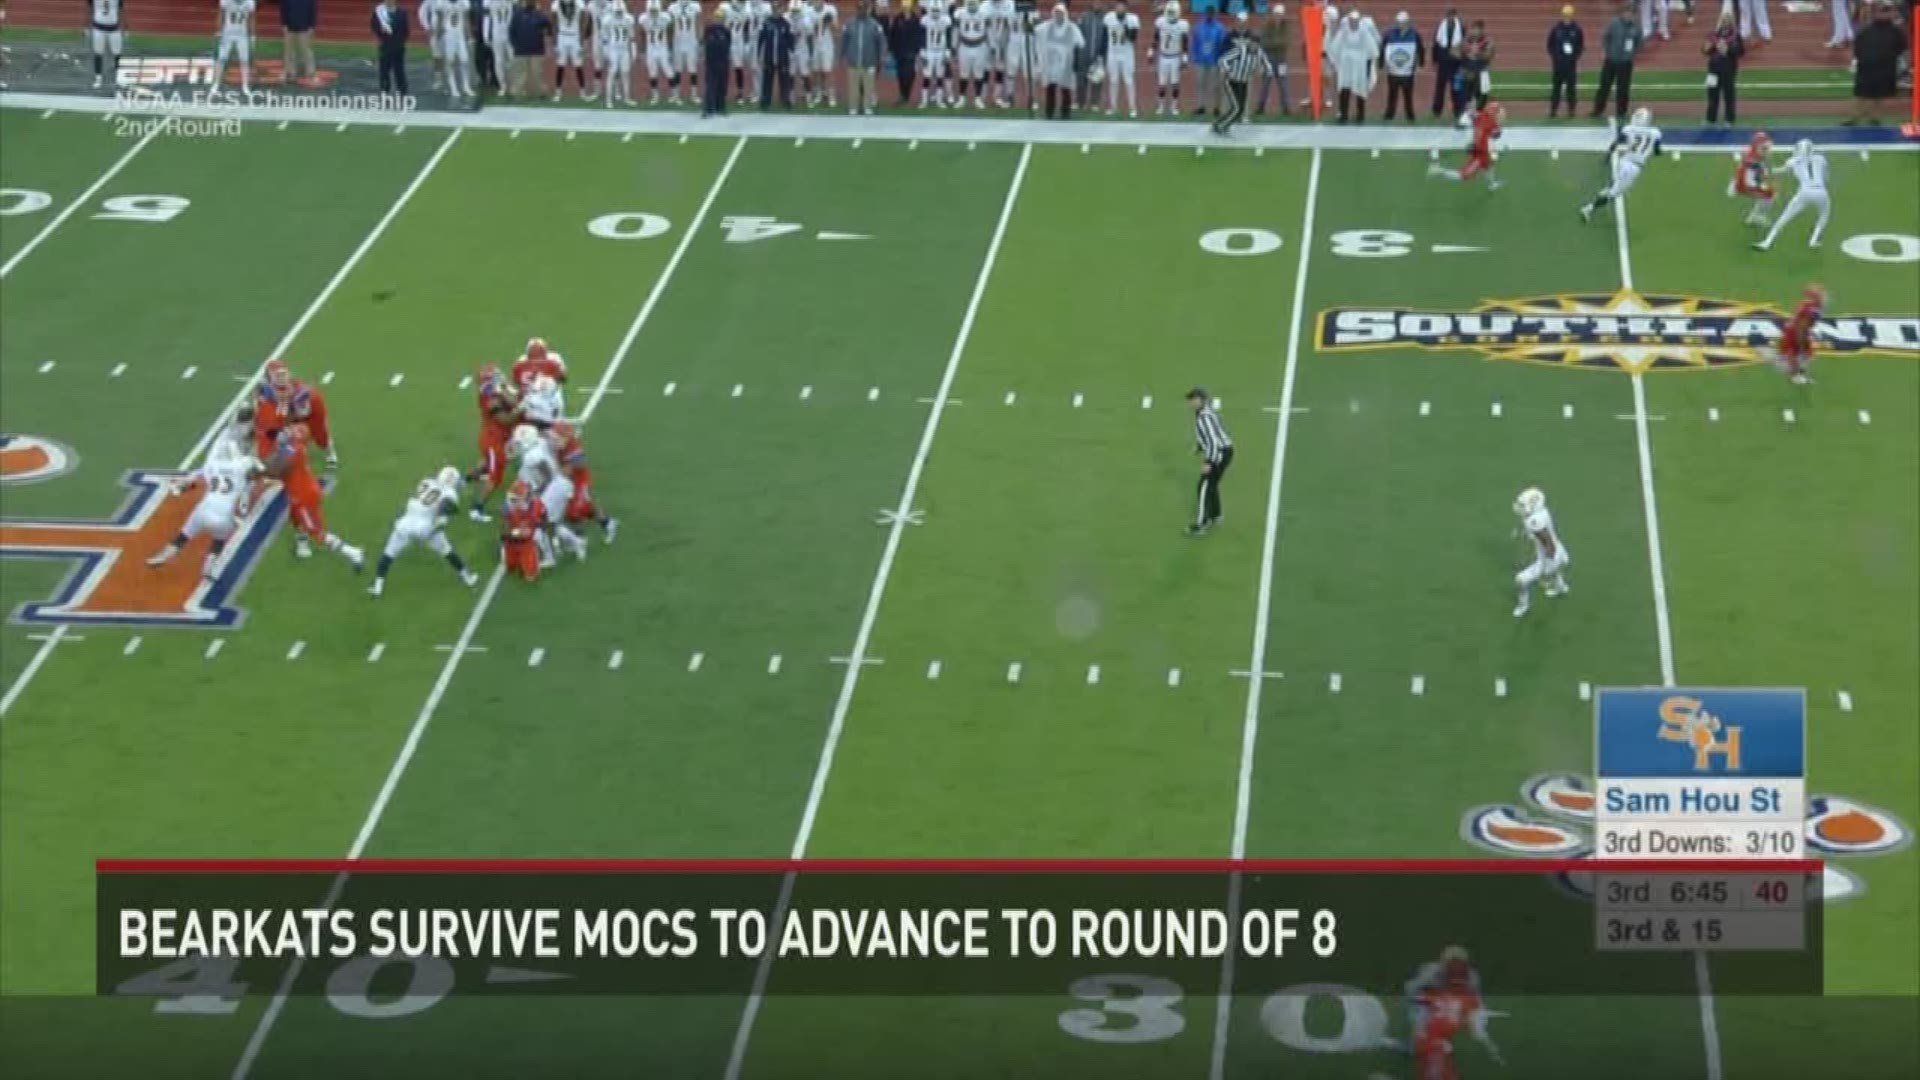 The Bearkats overcame a late Mocs run to advance to the third round of the FCS Playoffs.